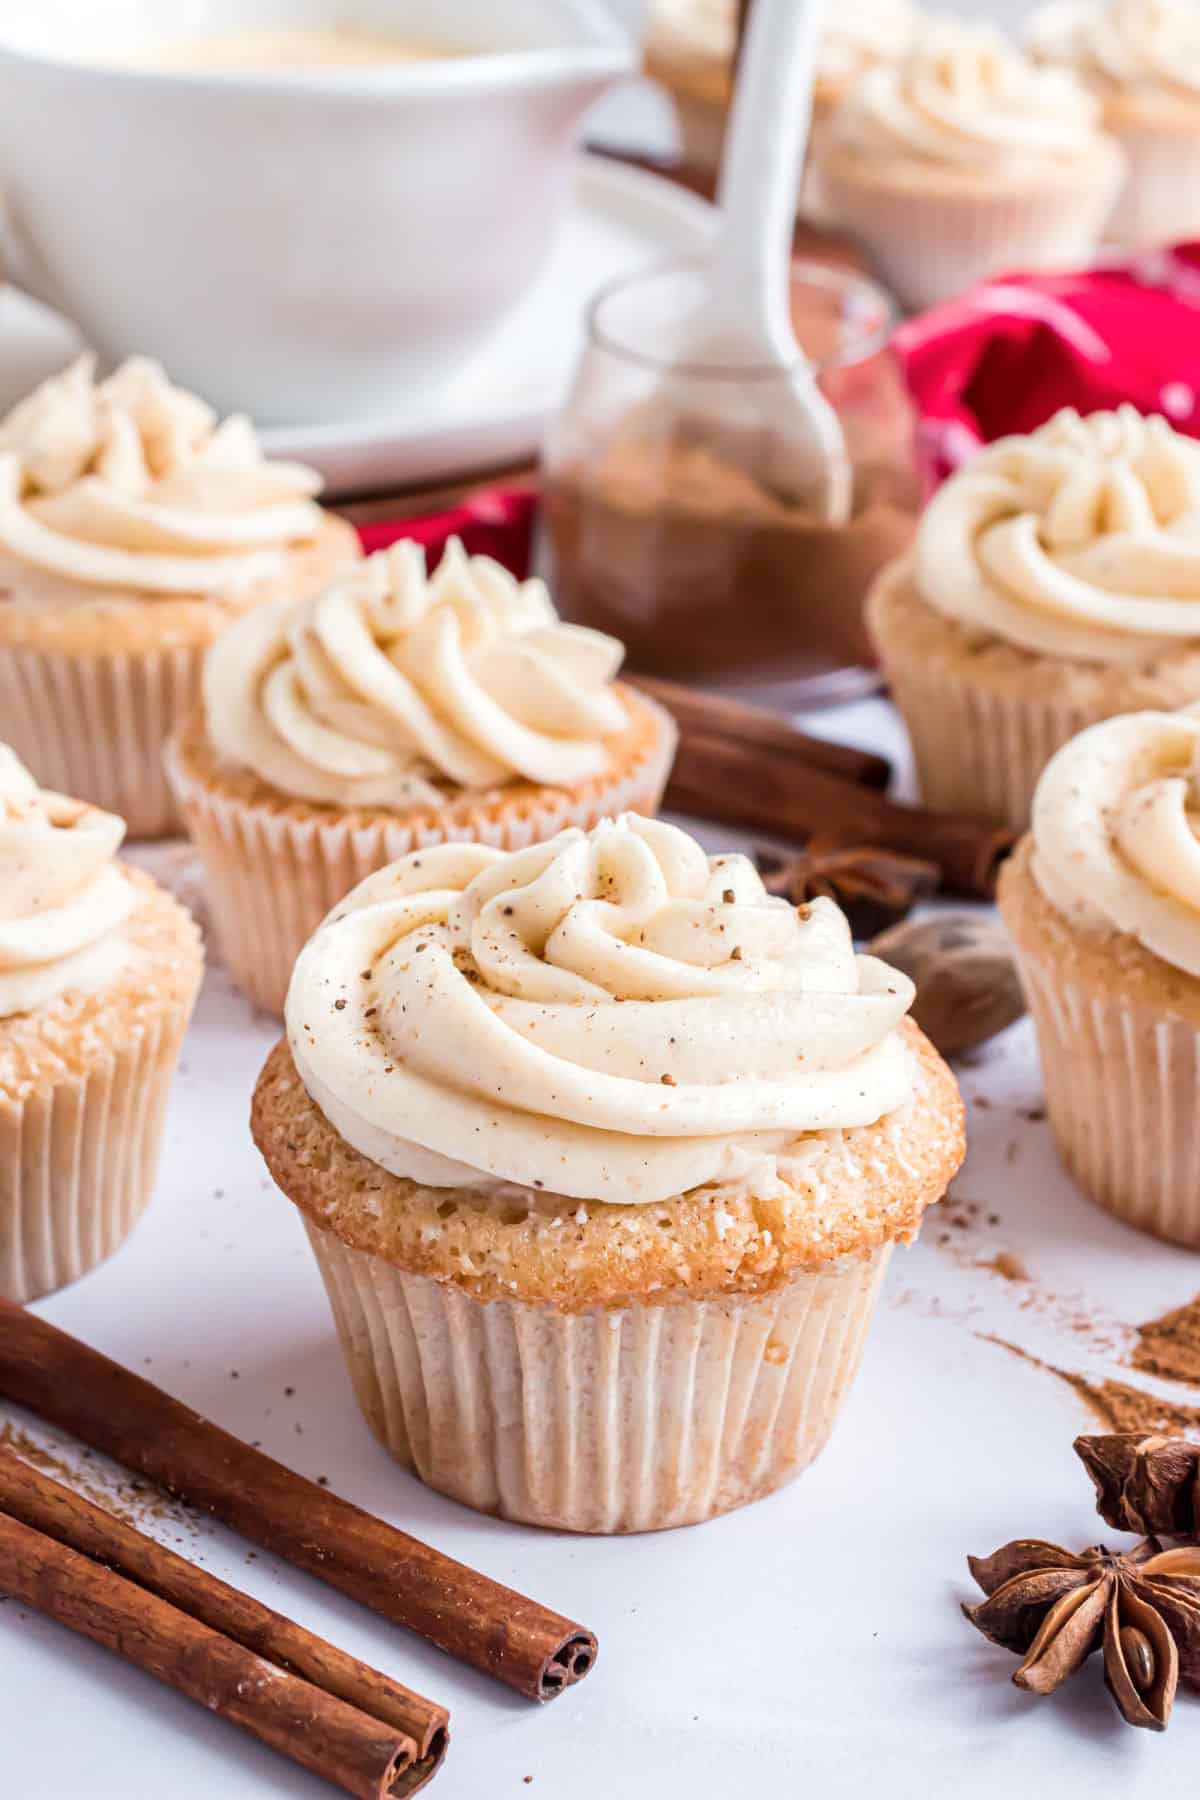 Cupcake with frosting and fresh nutmeg.